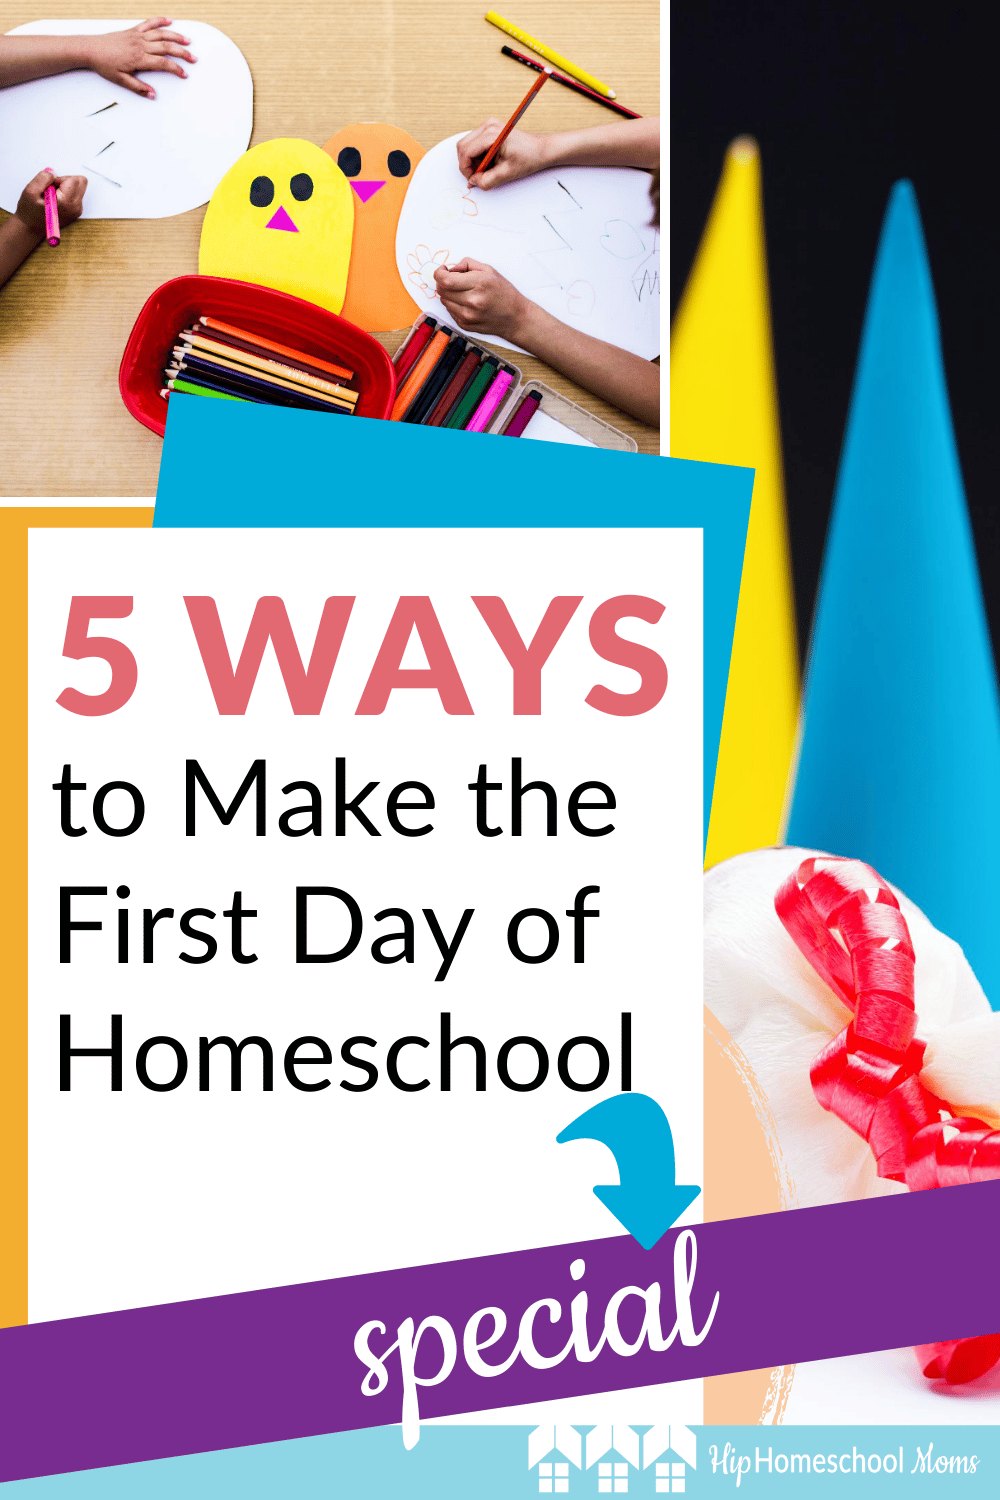 5 Ways to Make the First Day of Homeschool Special - Hip Homeschool Moms